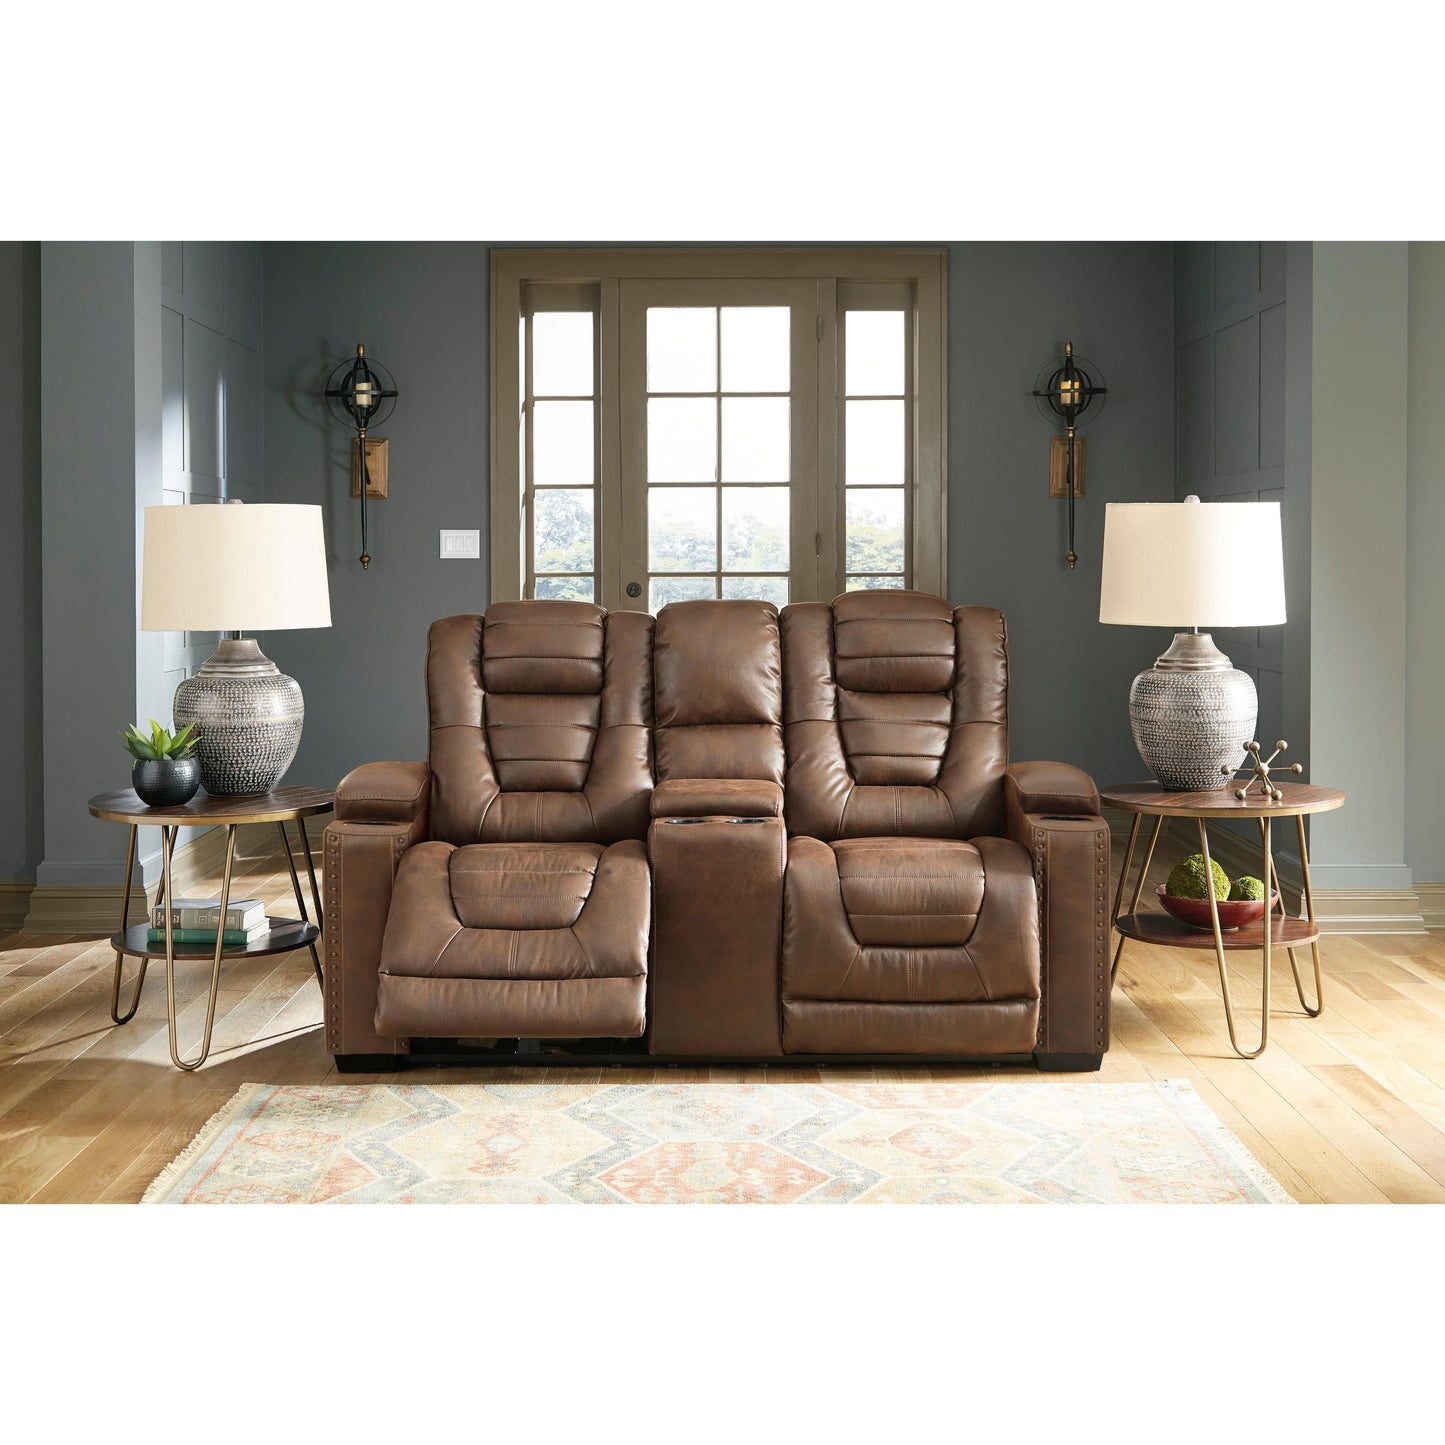 Signature Design by Ashley Owner's Box 24505U2 2 pc Power Reclining Living Room Set IMAGE 2